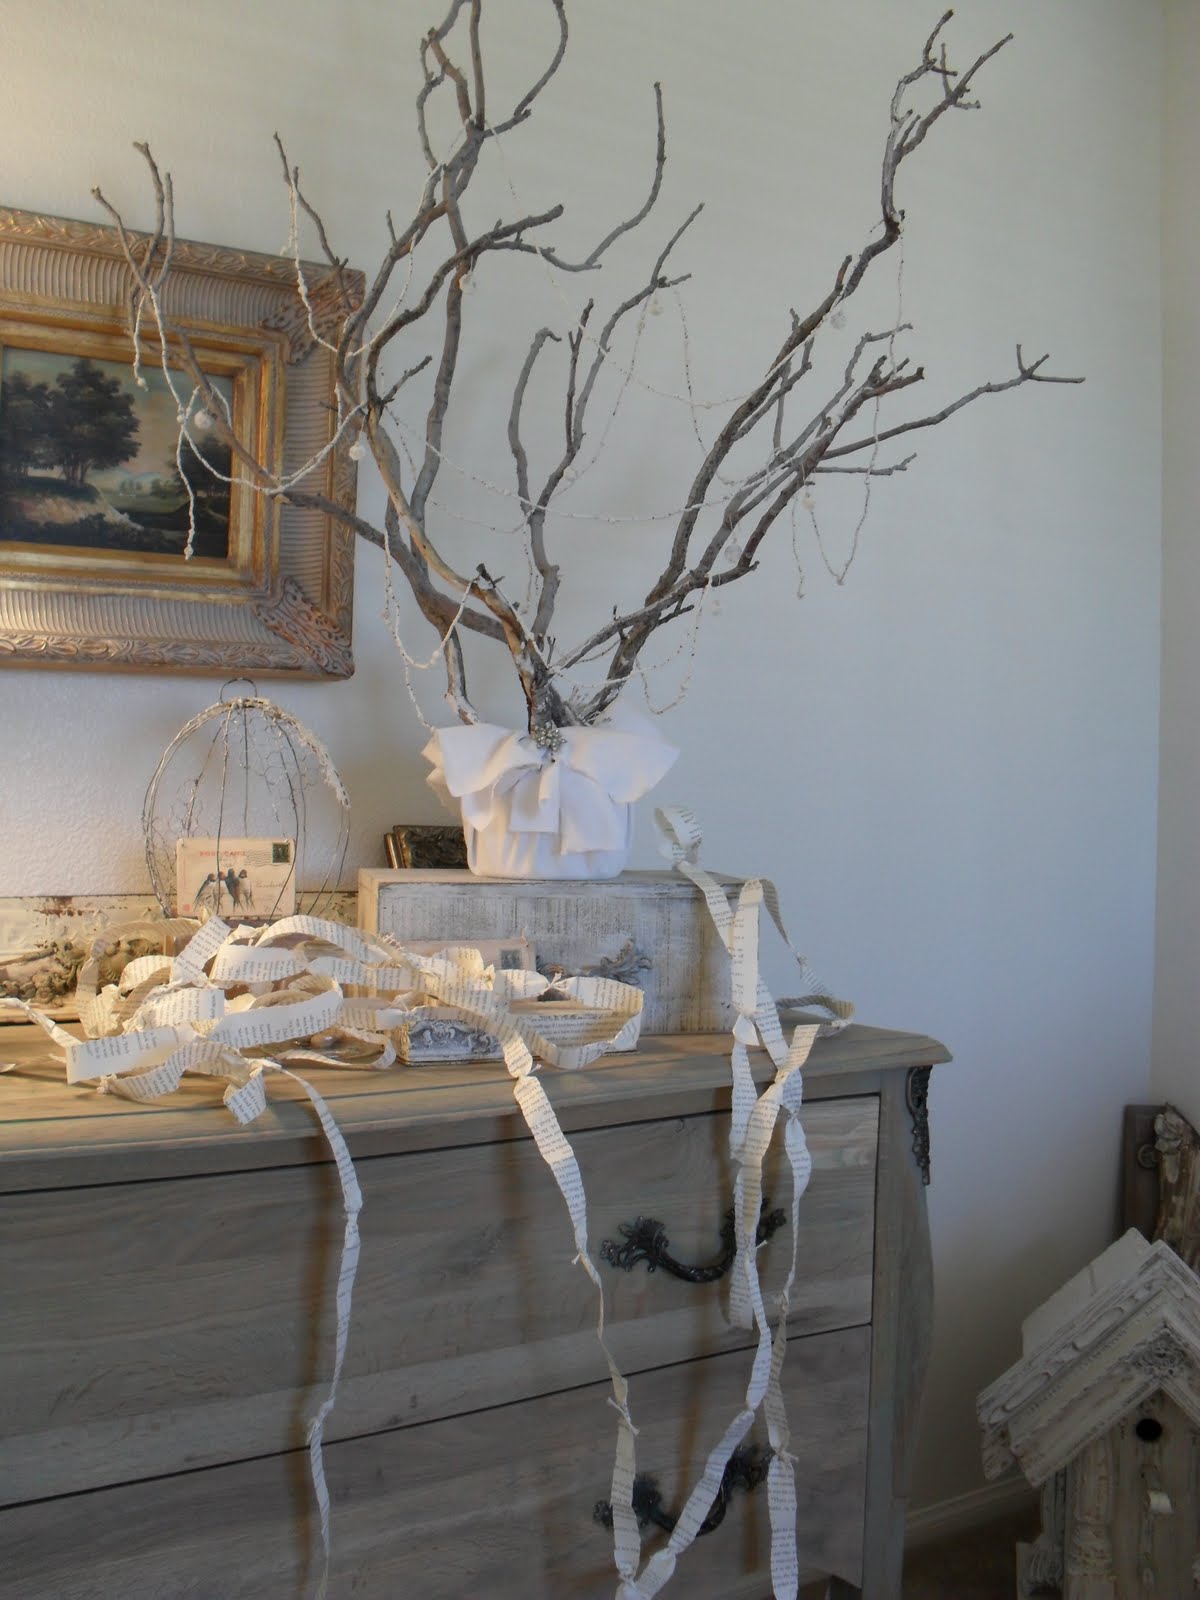 DIY Branch Decor That Looks Surprisingly Amazing - Page 2 of 2